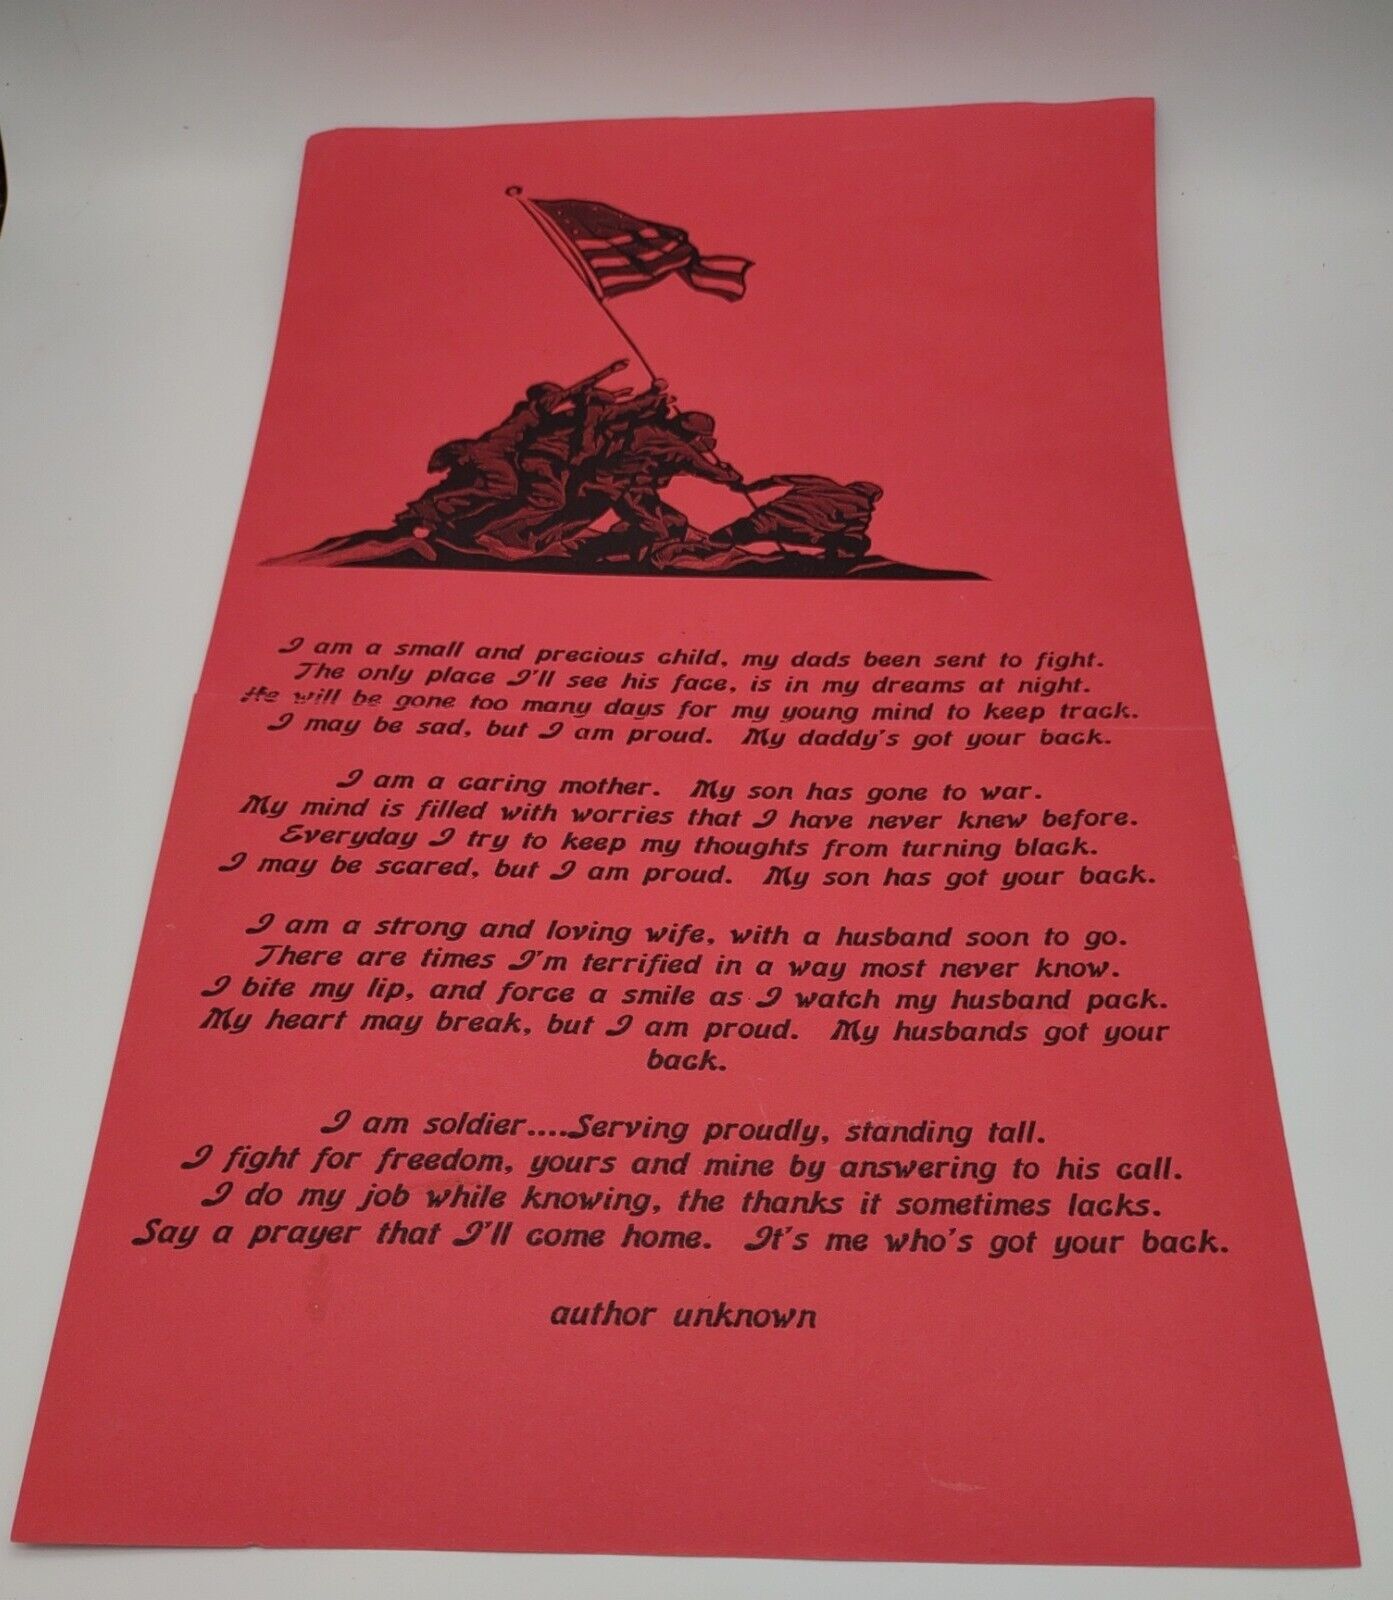 Vintage memorabilia war poem. 1960\'s small child. My dad\'s been sent to fight